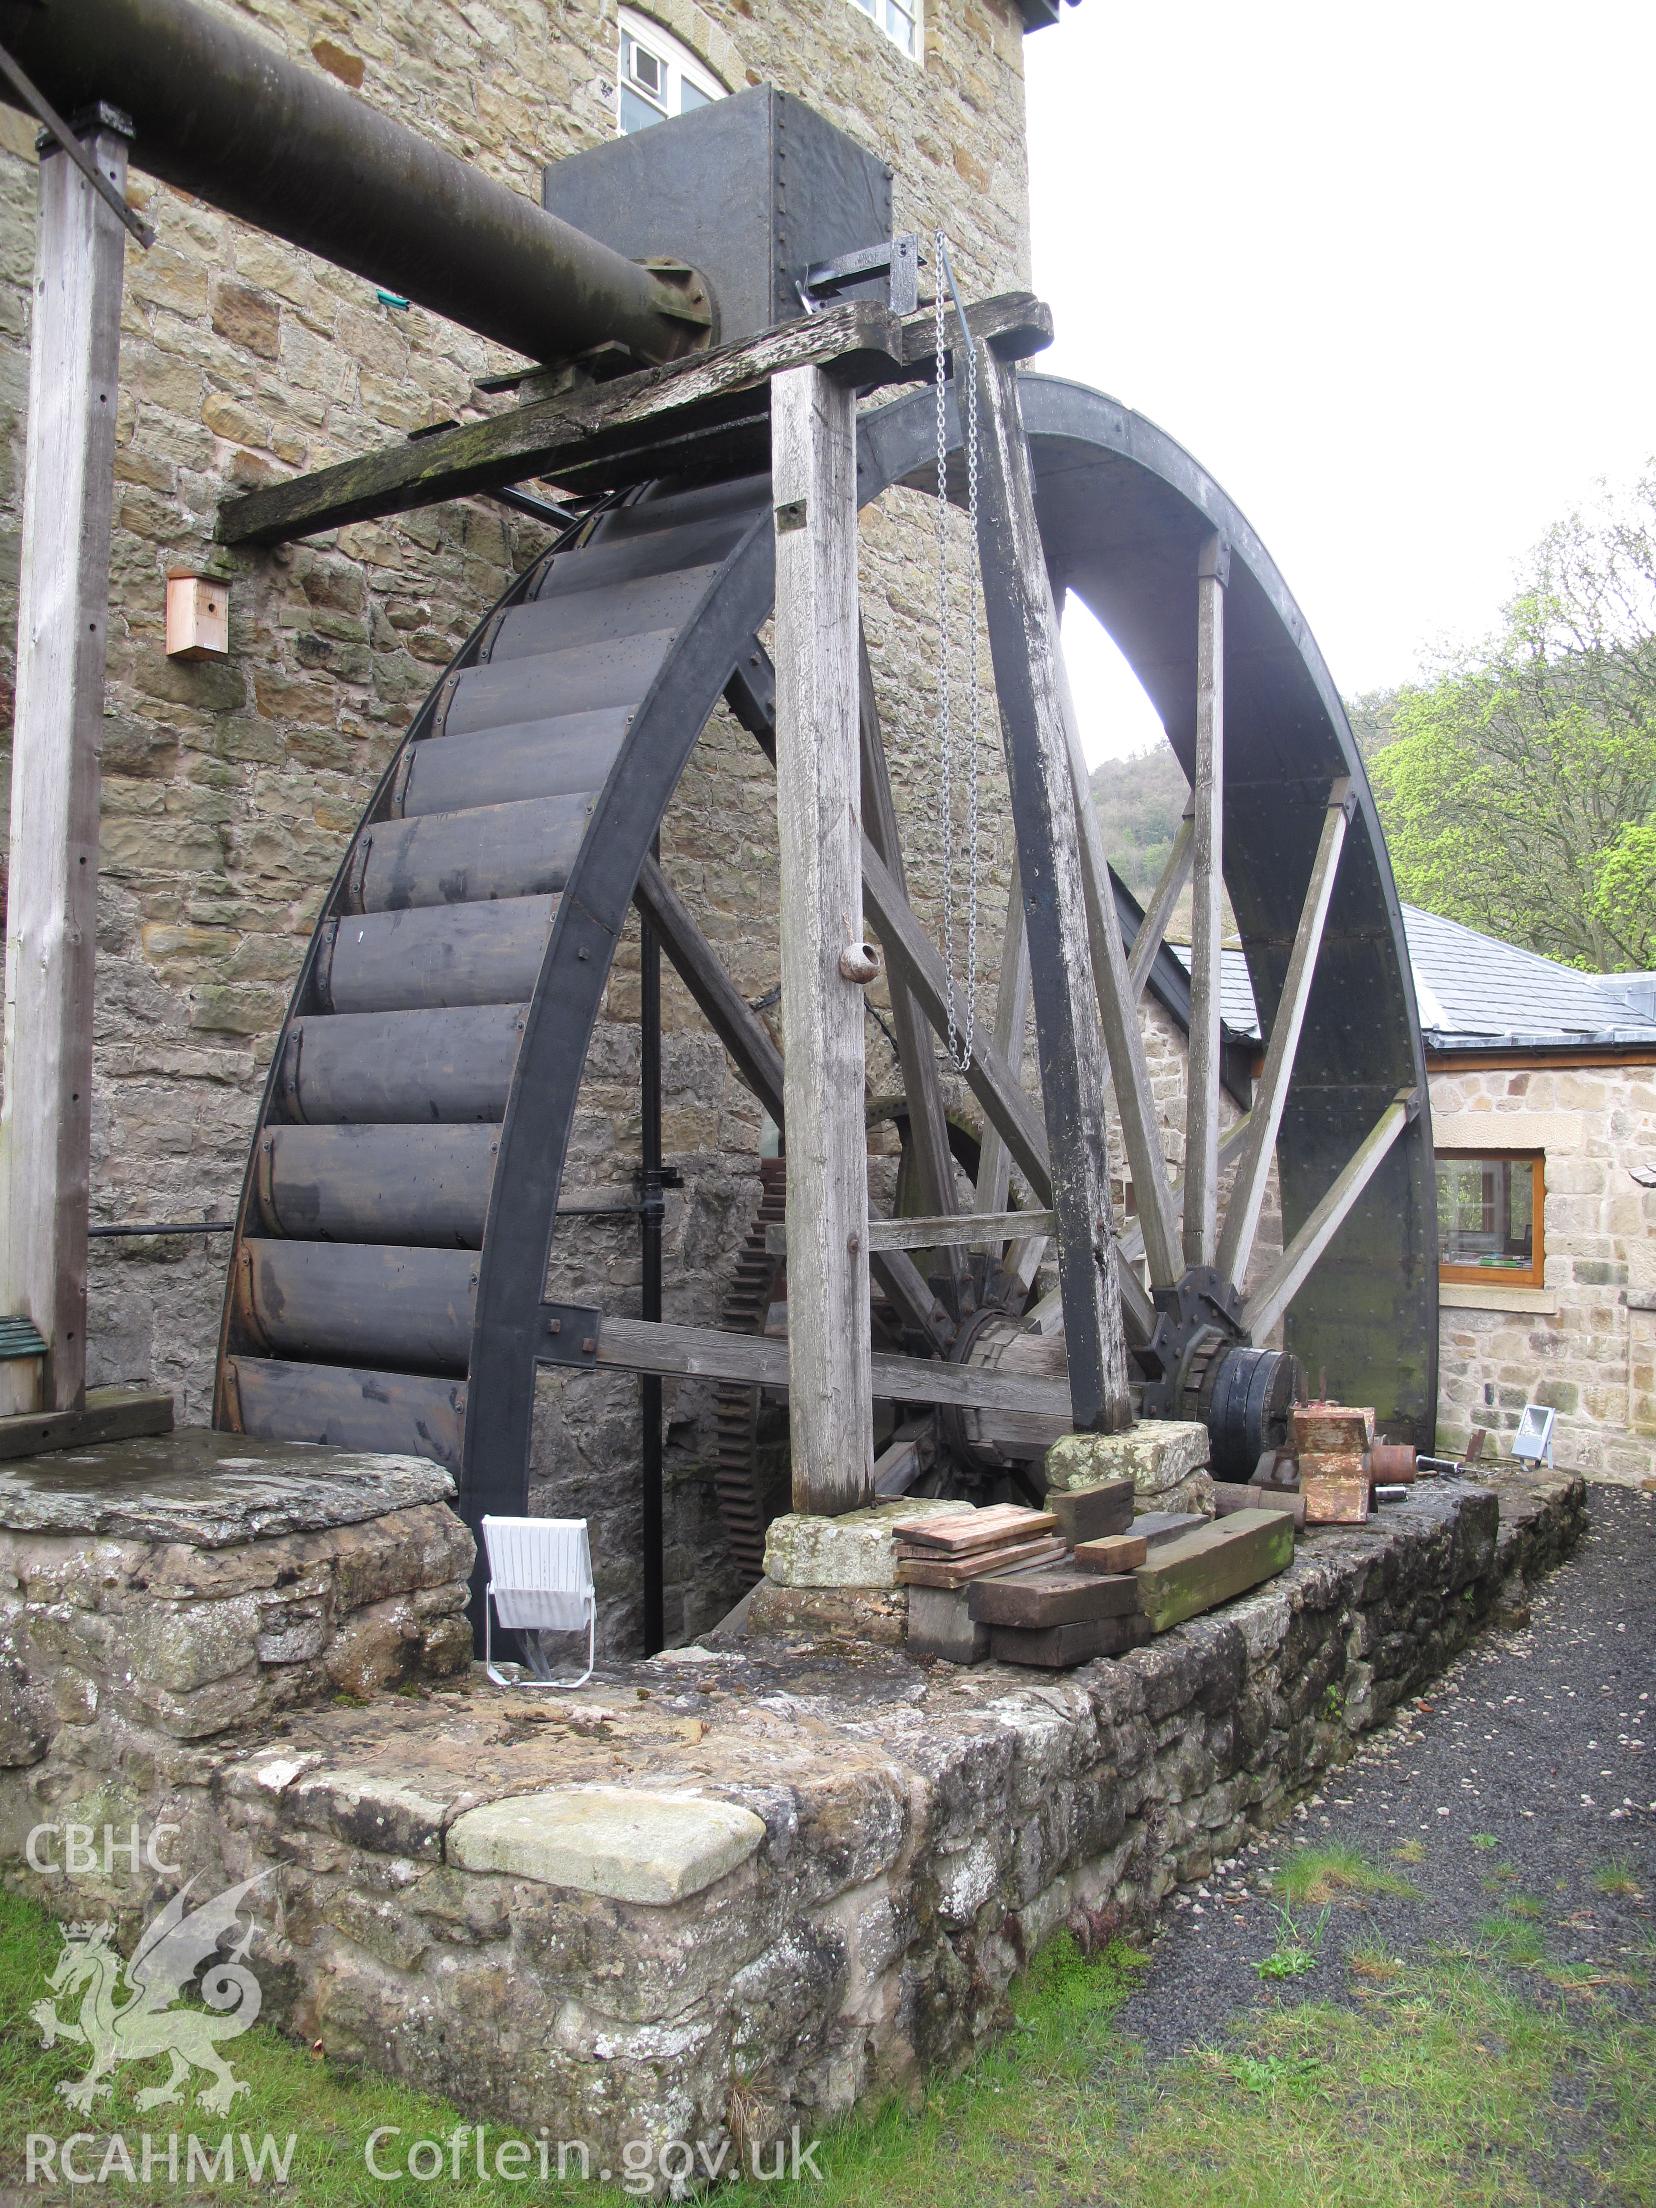 View of the waterwheel at Trevor Corn Mill.